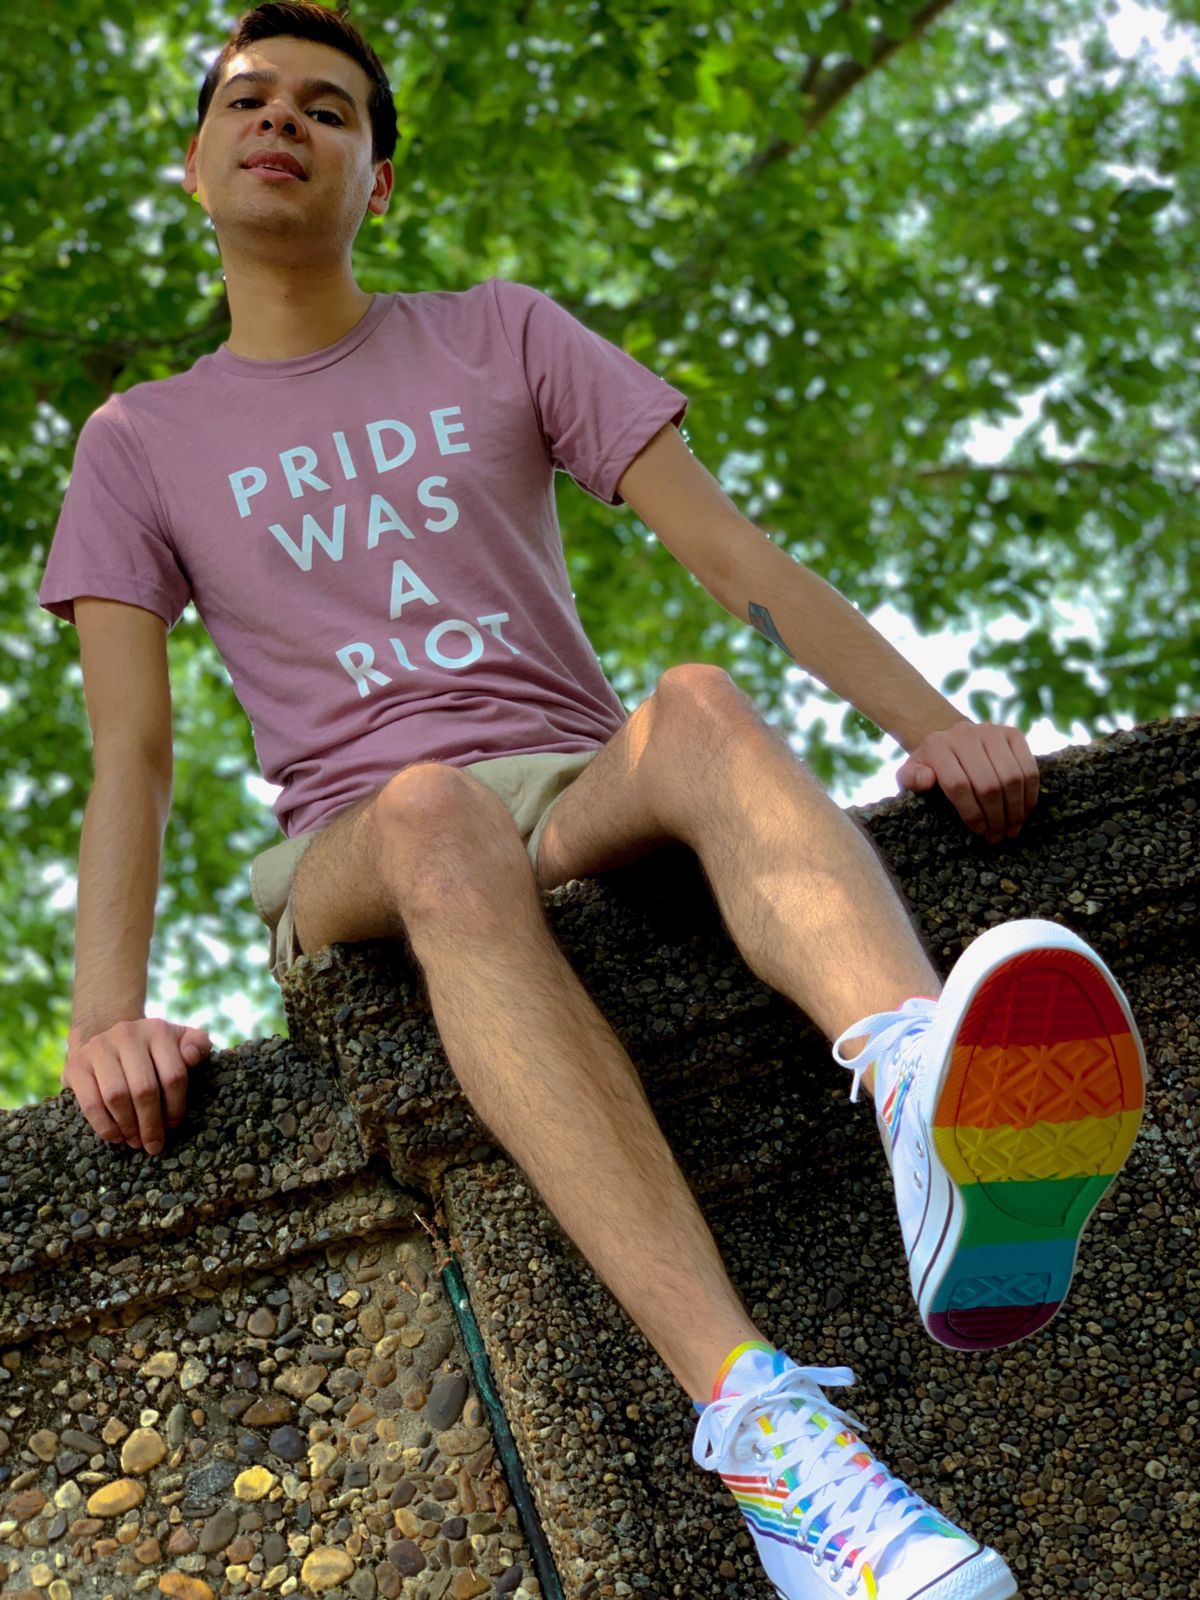 Jose Munoz poses in a T-shirt that says, “Pride was a riot.” The soles of his sneakers are rainbow-colored.